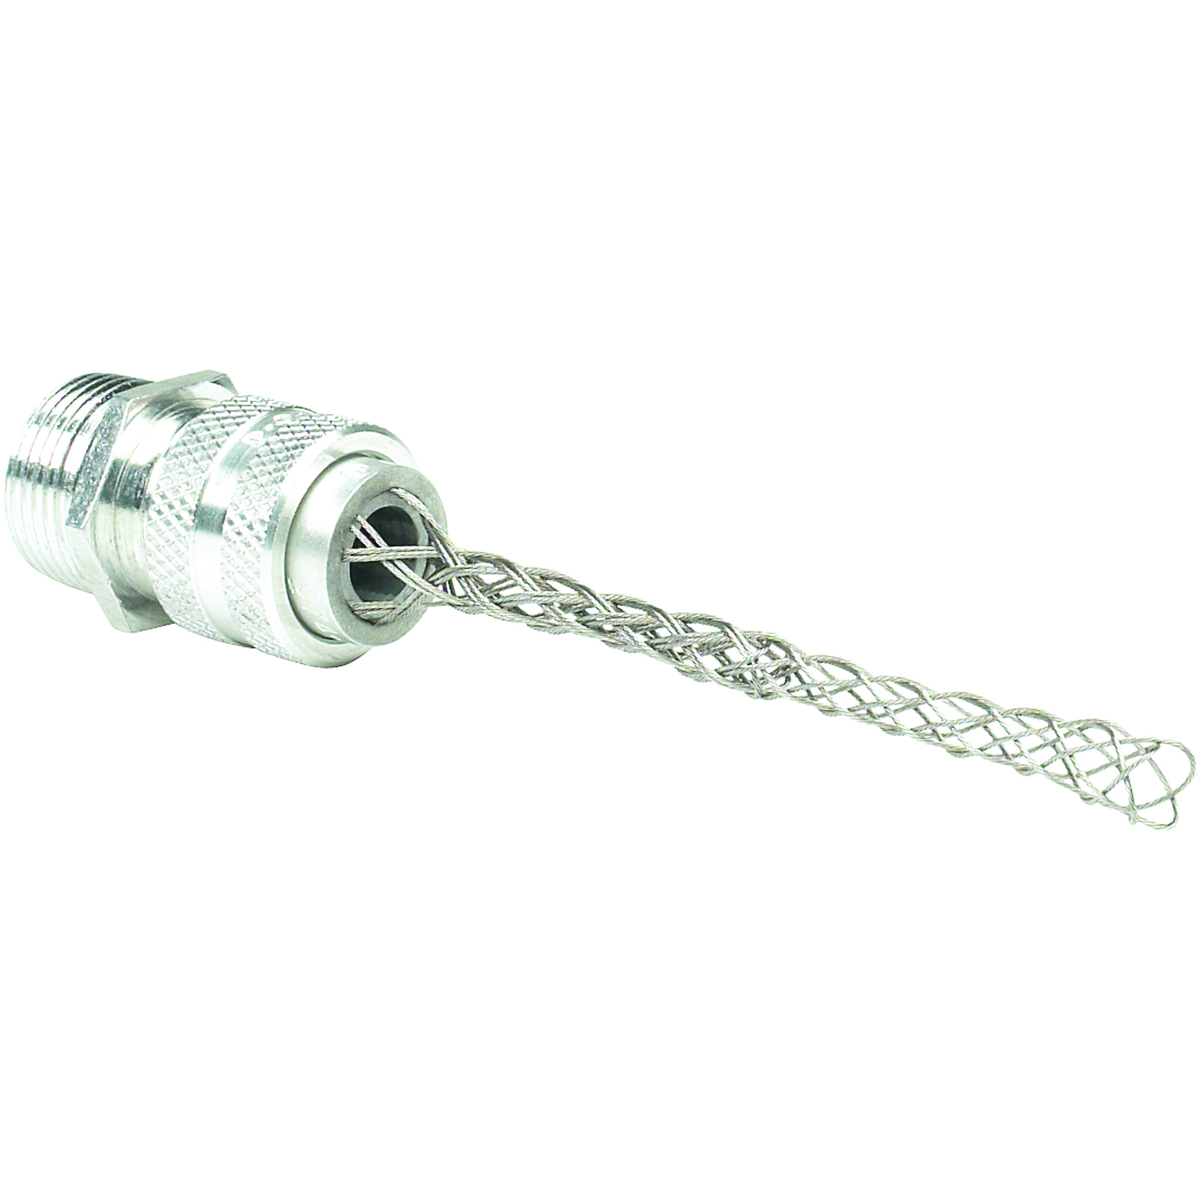 Z SERIES FITTINGS - ALUMINUM CORD CONNECTOR WITH MESH GRIP - Z CORDCONNECTOR - STRAIGHT - NPT SIZE 3/4 IN - YELLOW